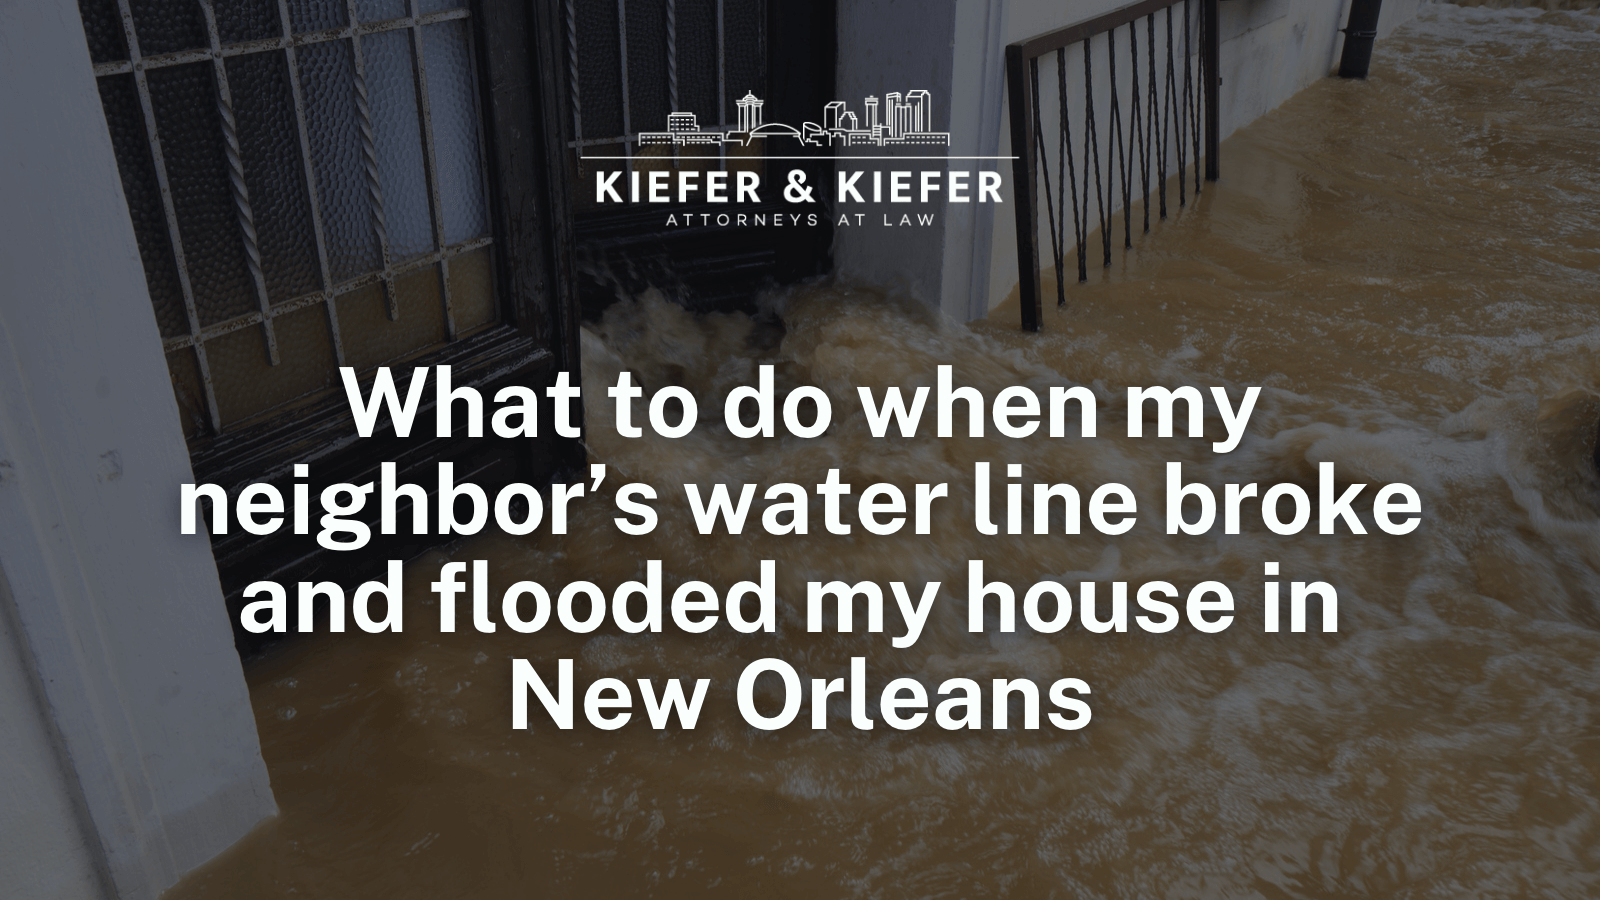 What to do when my neighbor’s water line broke and flooded my house in New Orleans - Kiefer & Kiefer New Orleans Personal Injury Attorneys